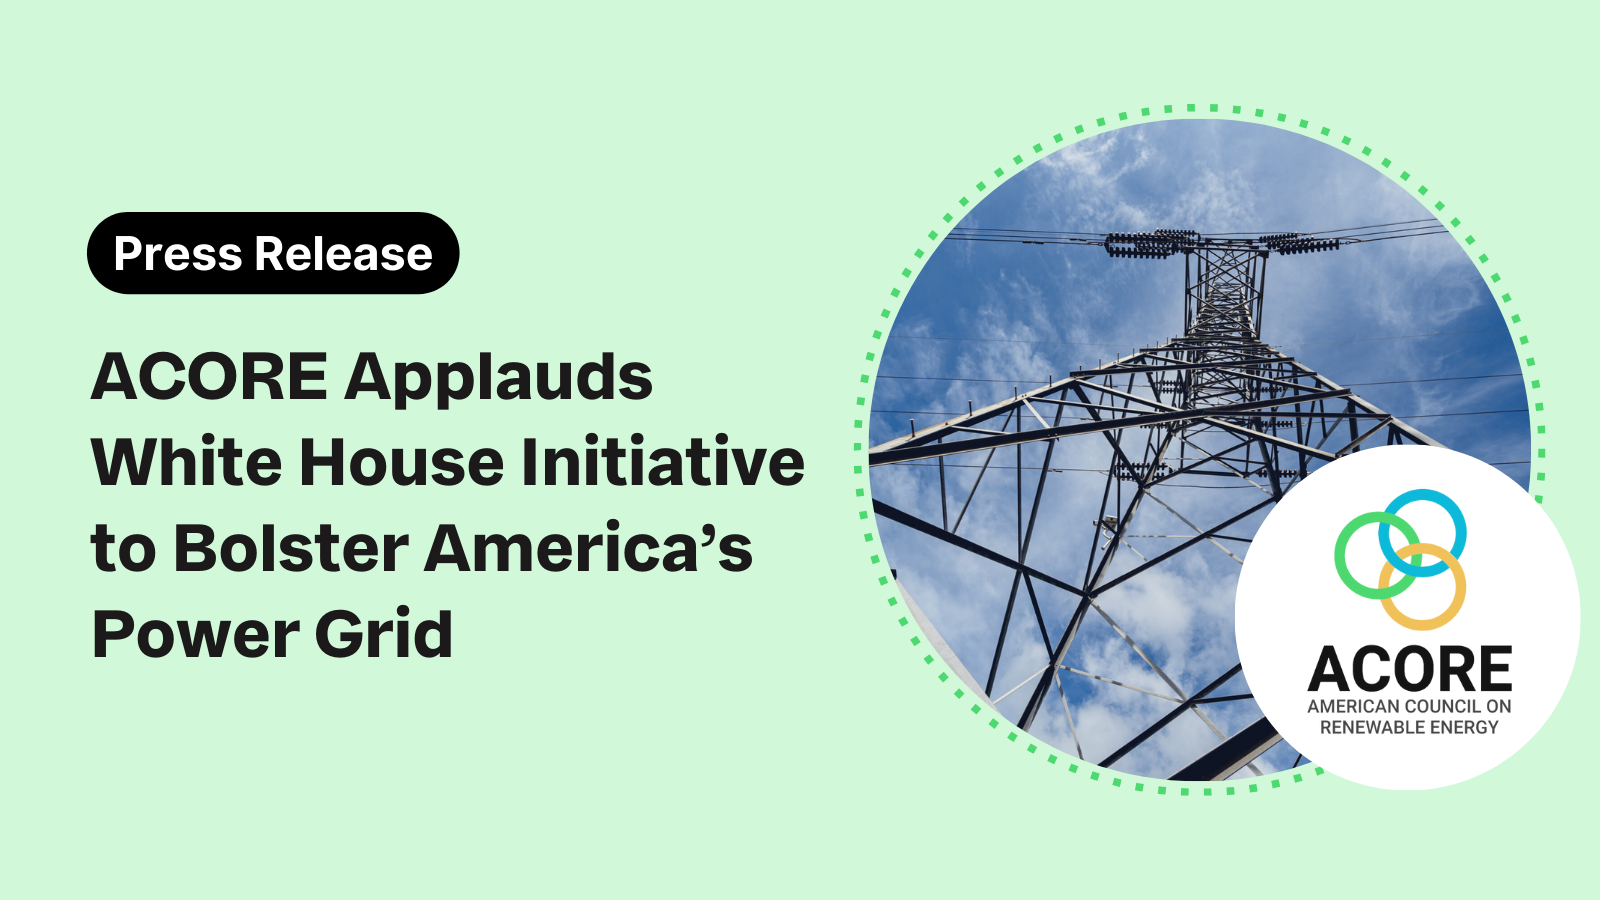 ACORE Applauds White House Initiative to Bolster America’s Power Grid